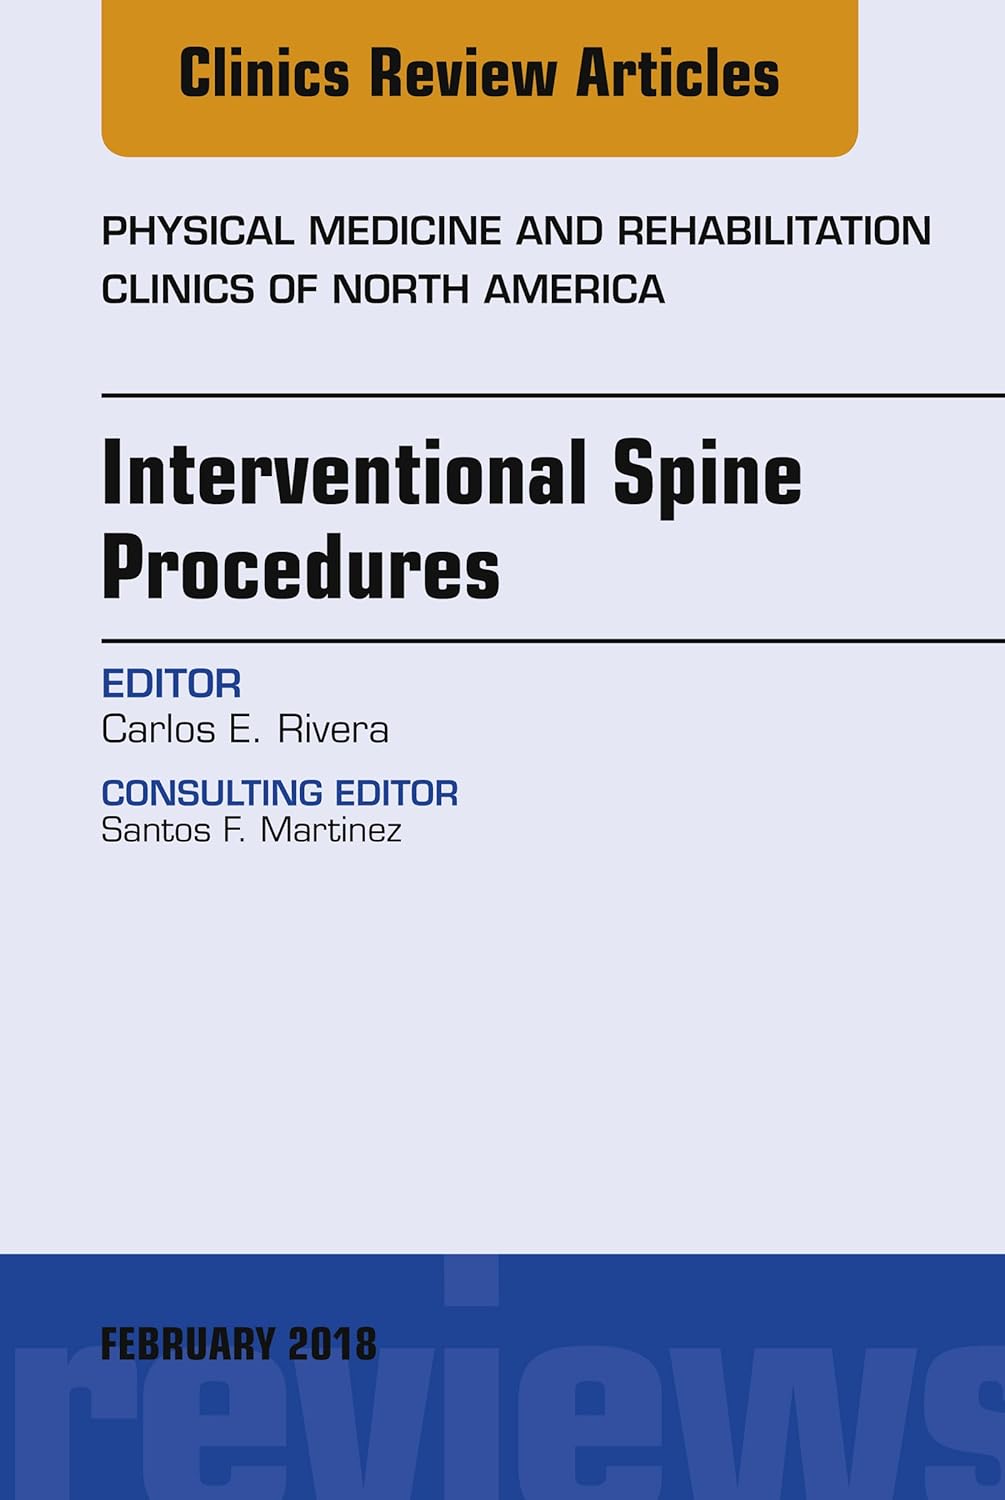 Interventional Spine Procedures, An Issue of Physical Medicine and Rehabilitation Clinics of North America (Volume 29-1) (The Clinics: Orthopedics, Volume 29-1) by Carlos E. Rivera 